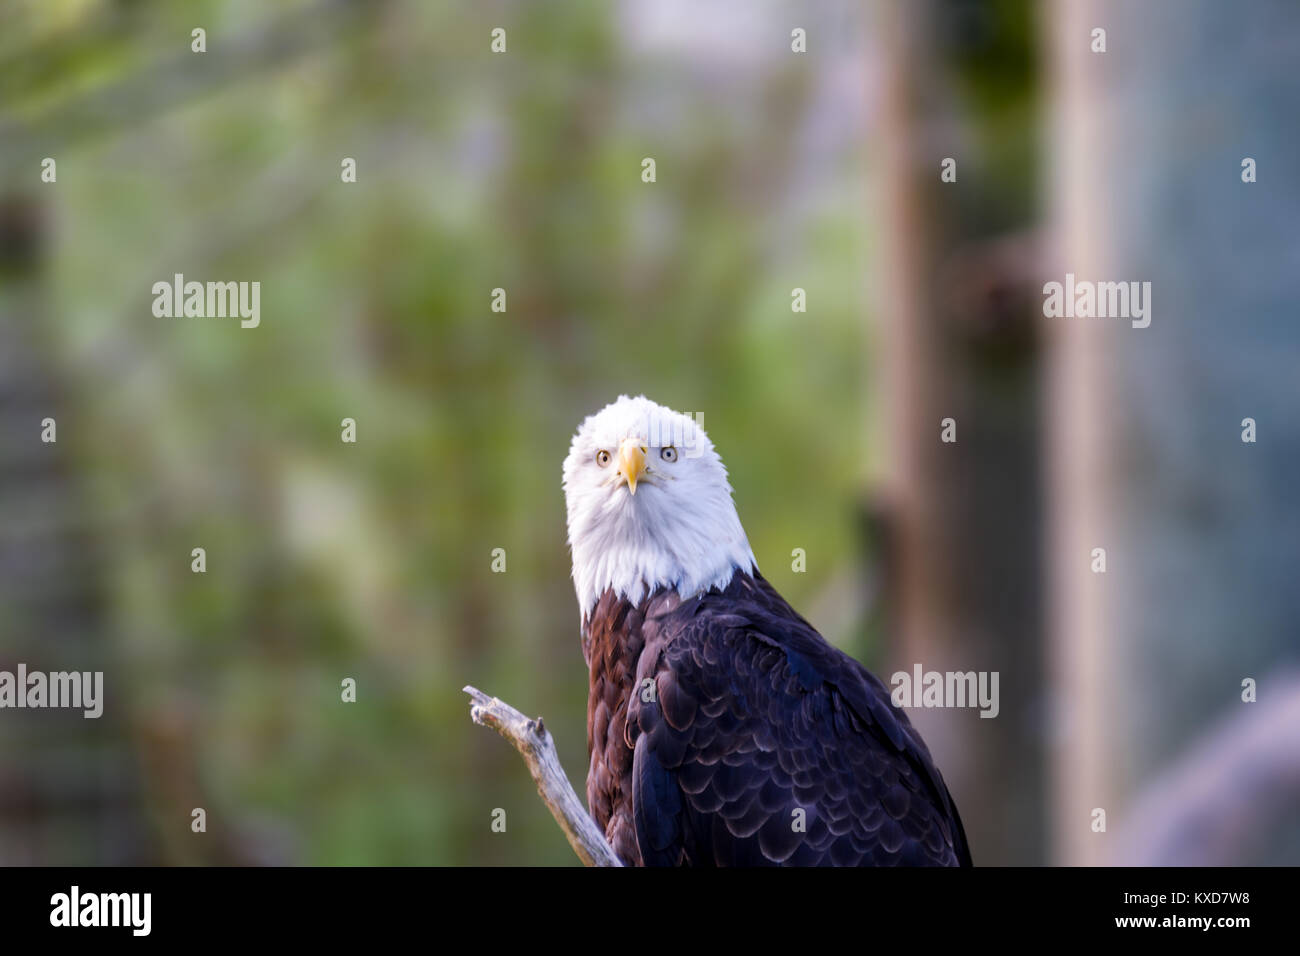 Wild animal, bird brown eagle with white head and yellow beak, the background of the green color is blurred Stock Photo